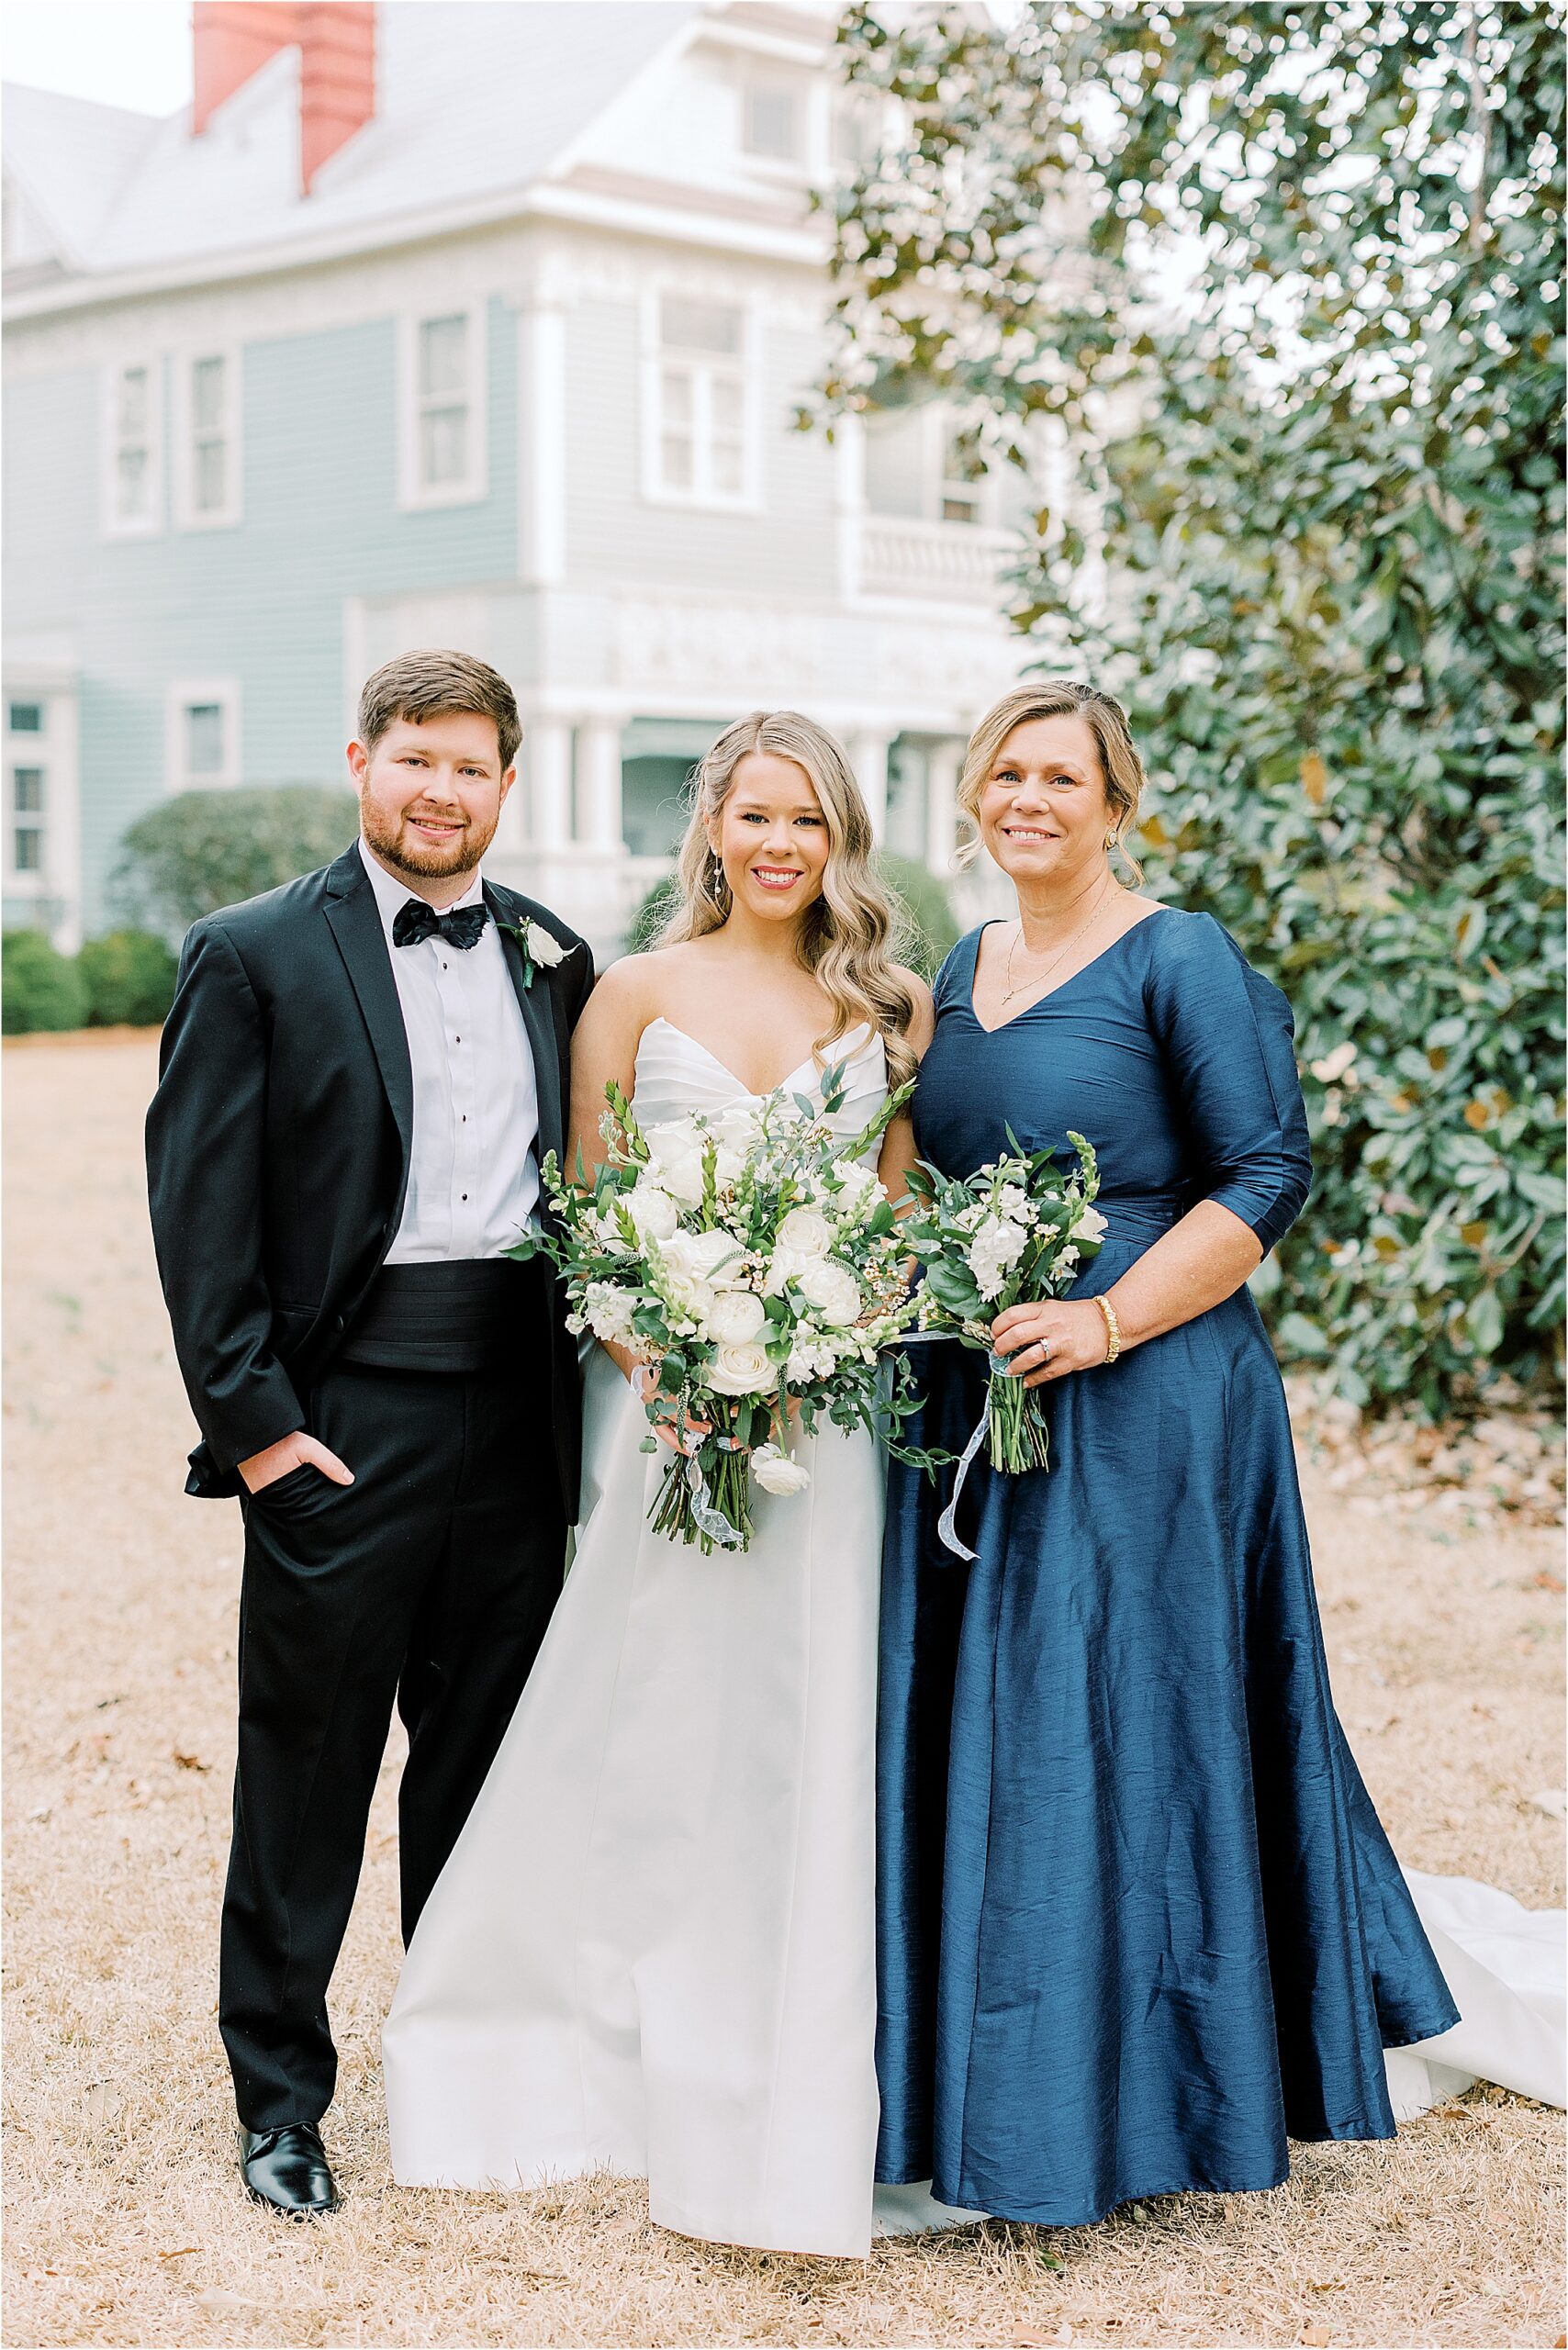 Mom, bride, and groom in front of a blue house surrounded by green trees.